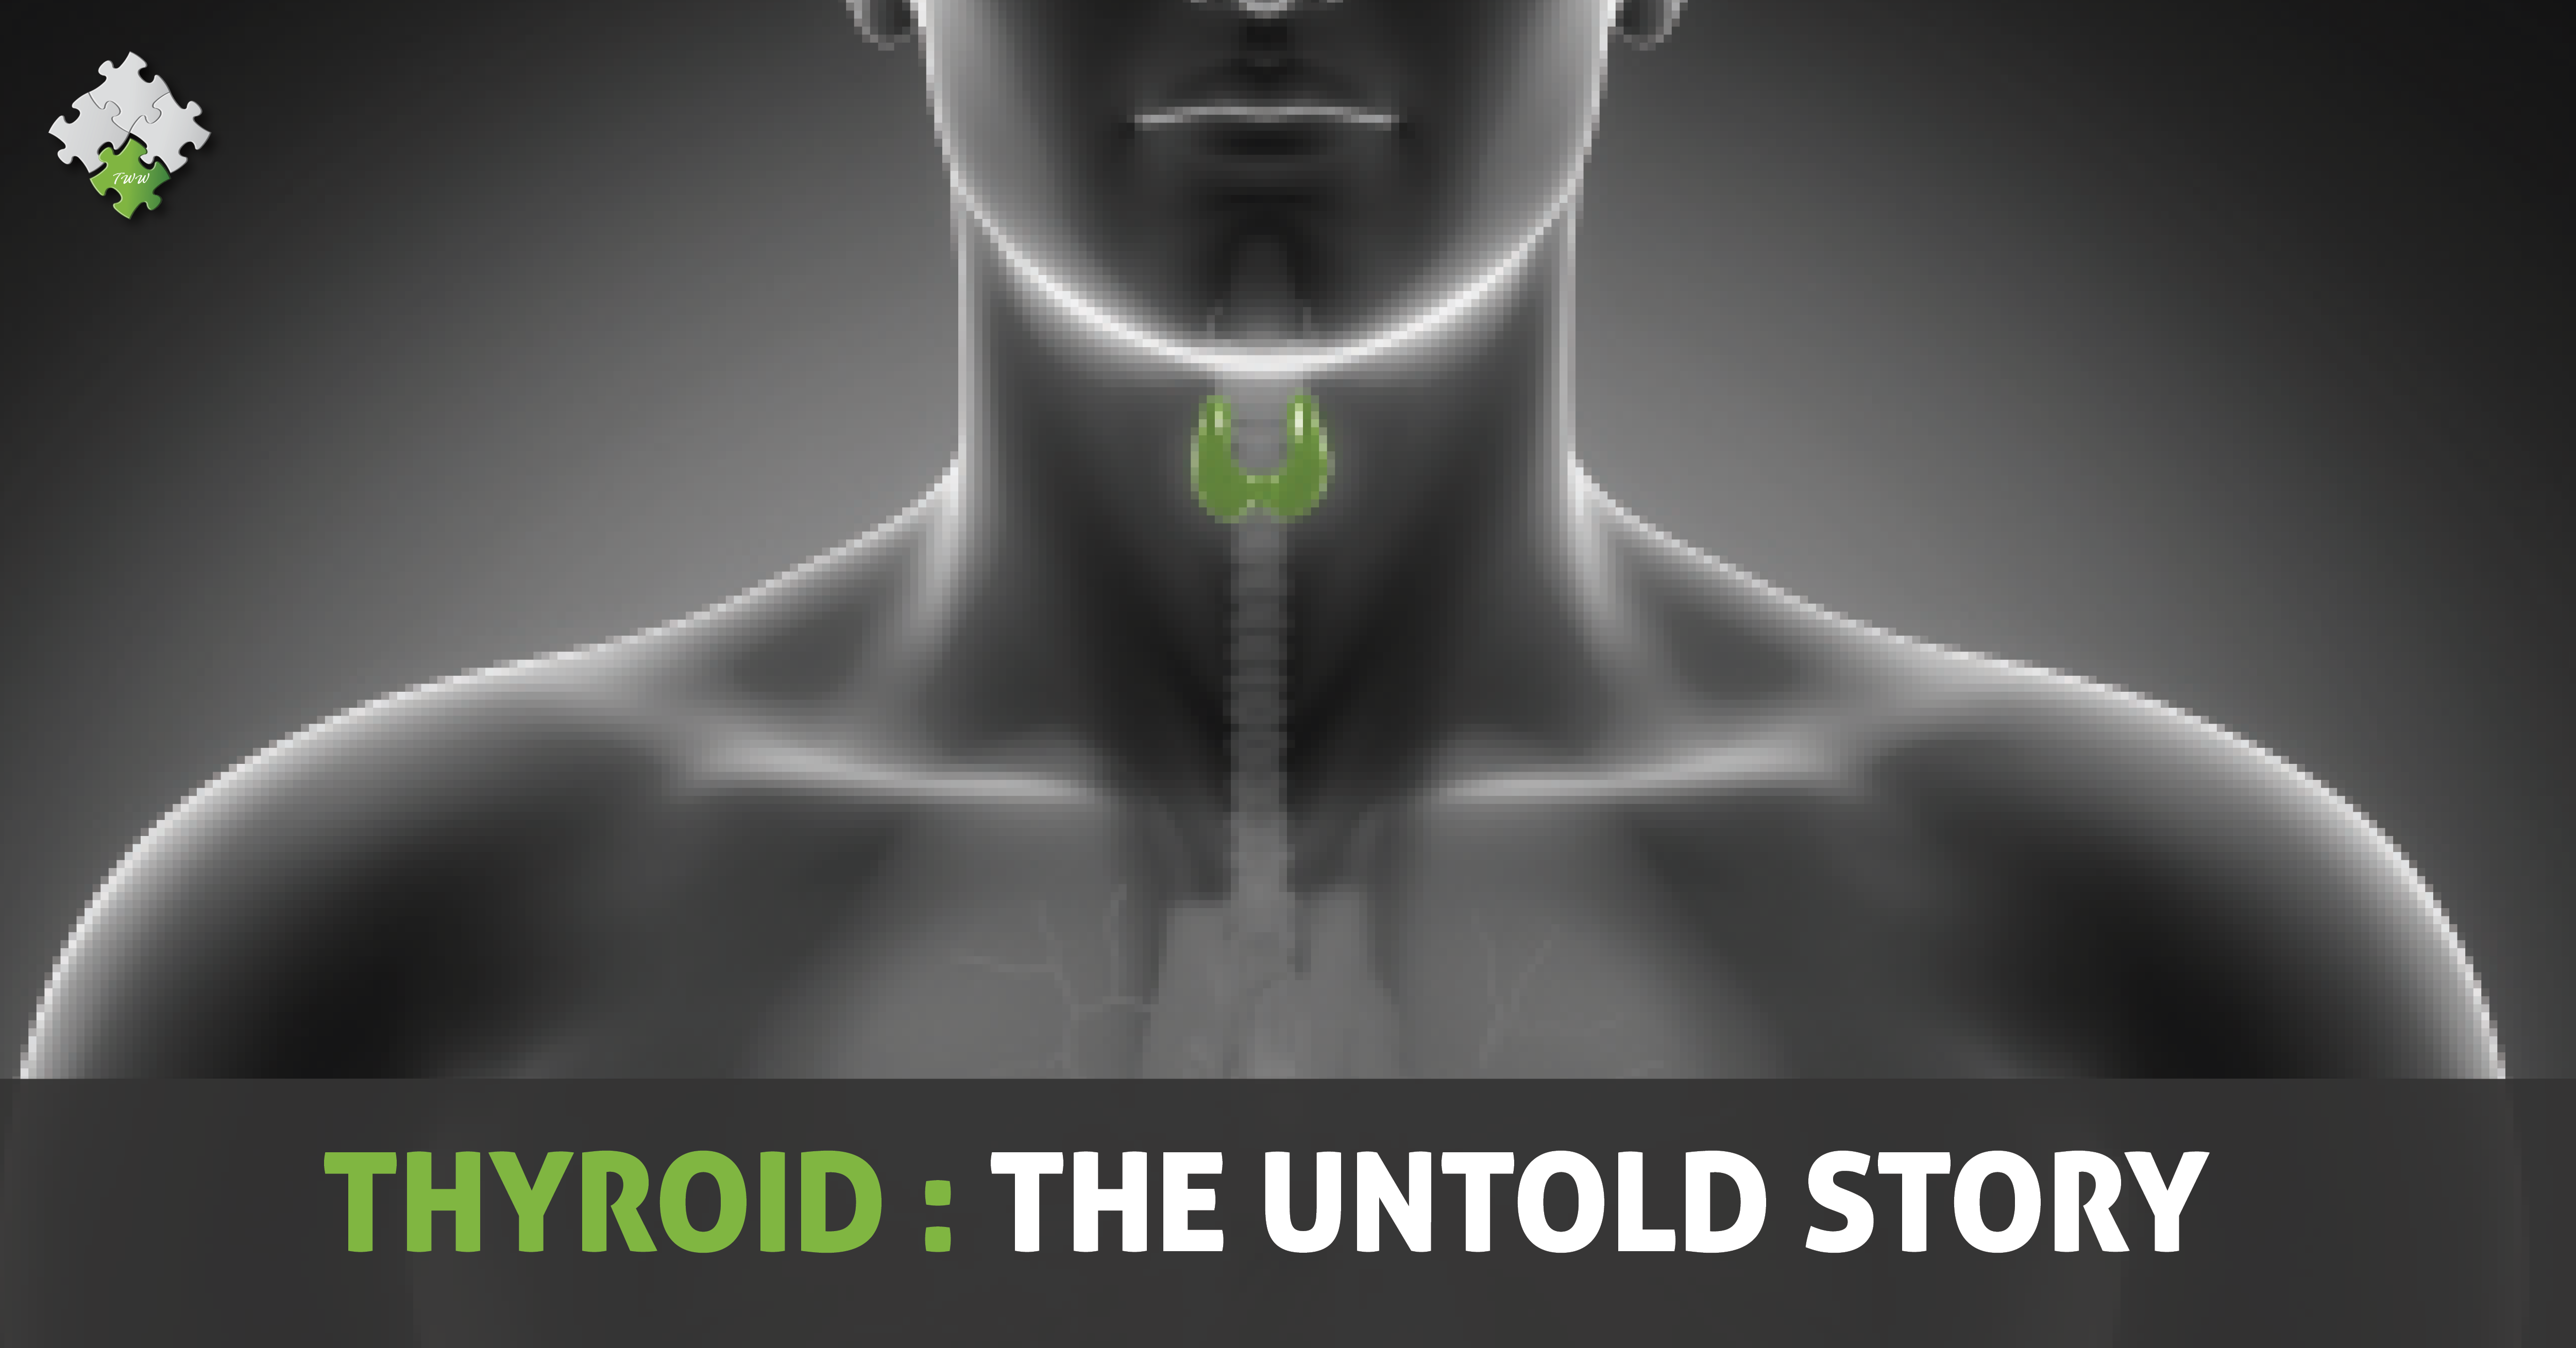 Thyroid - The Untold Story